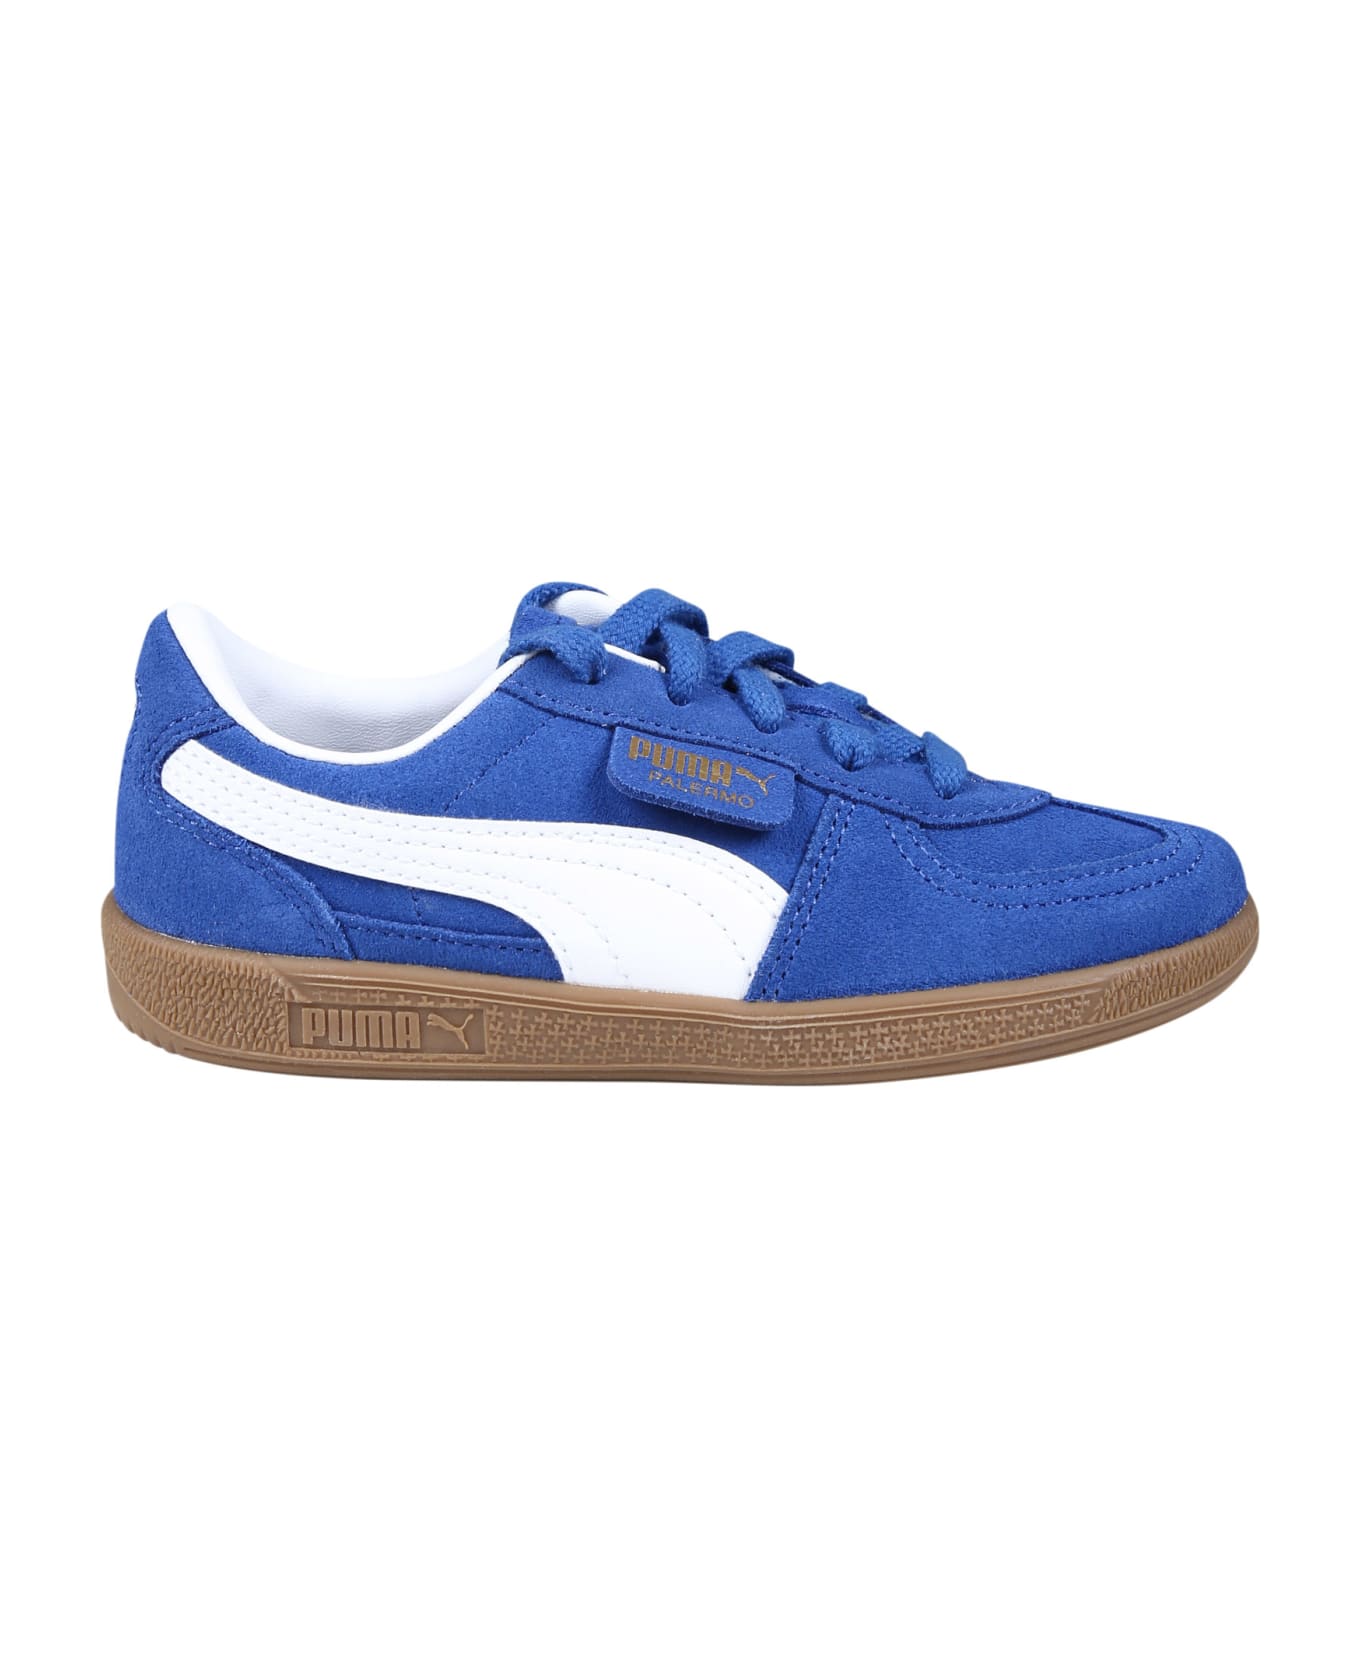 Puma Palermo Ps Light Blue Low Sneakers For Kids - Light Blue